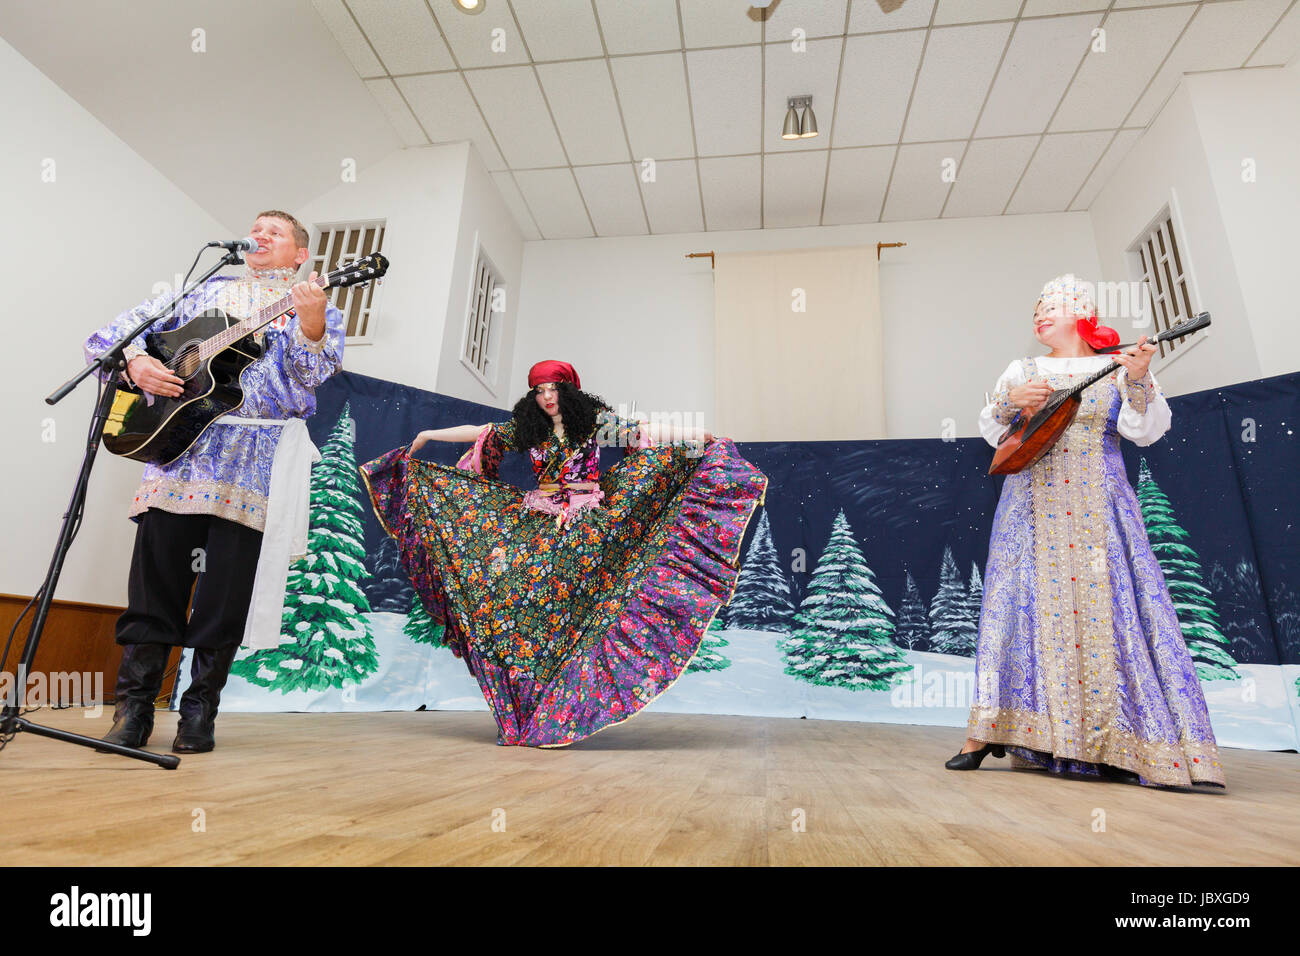 TROY, NEW YORK/USA - FEB 25 2017: Traditional music and dance at annual Russian Festival Stock Photo